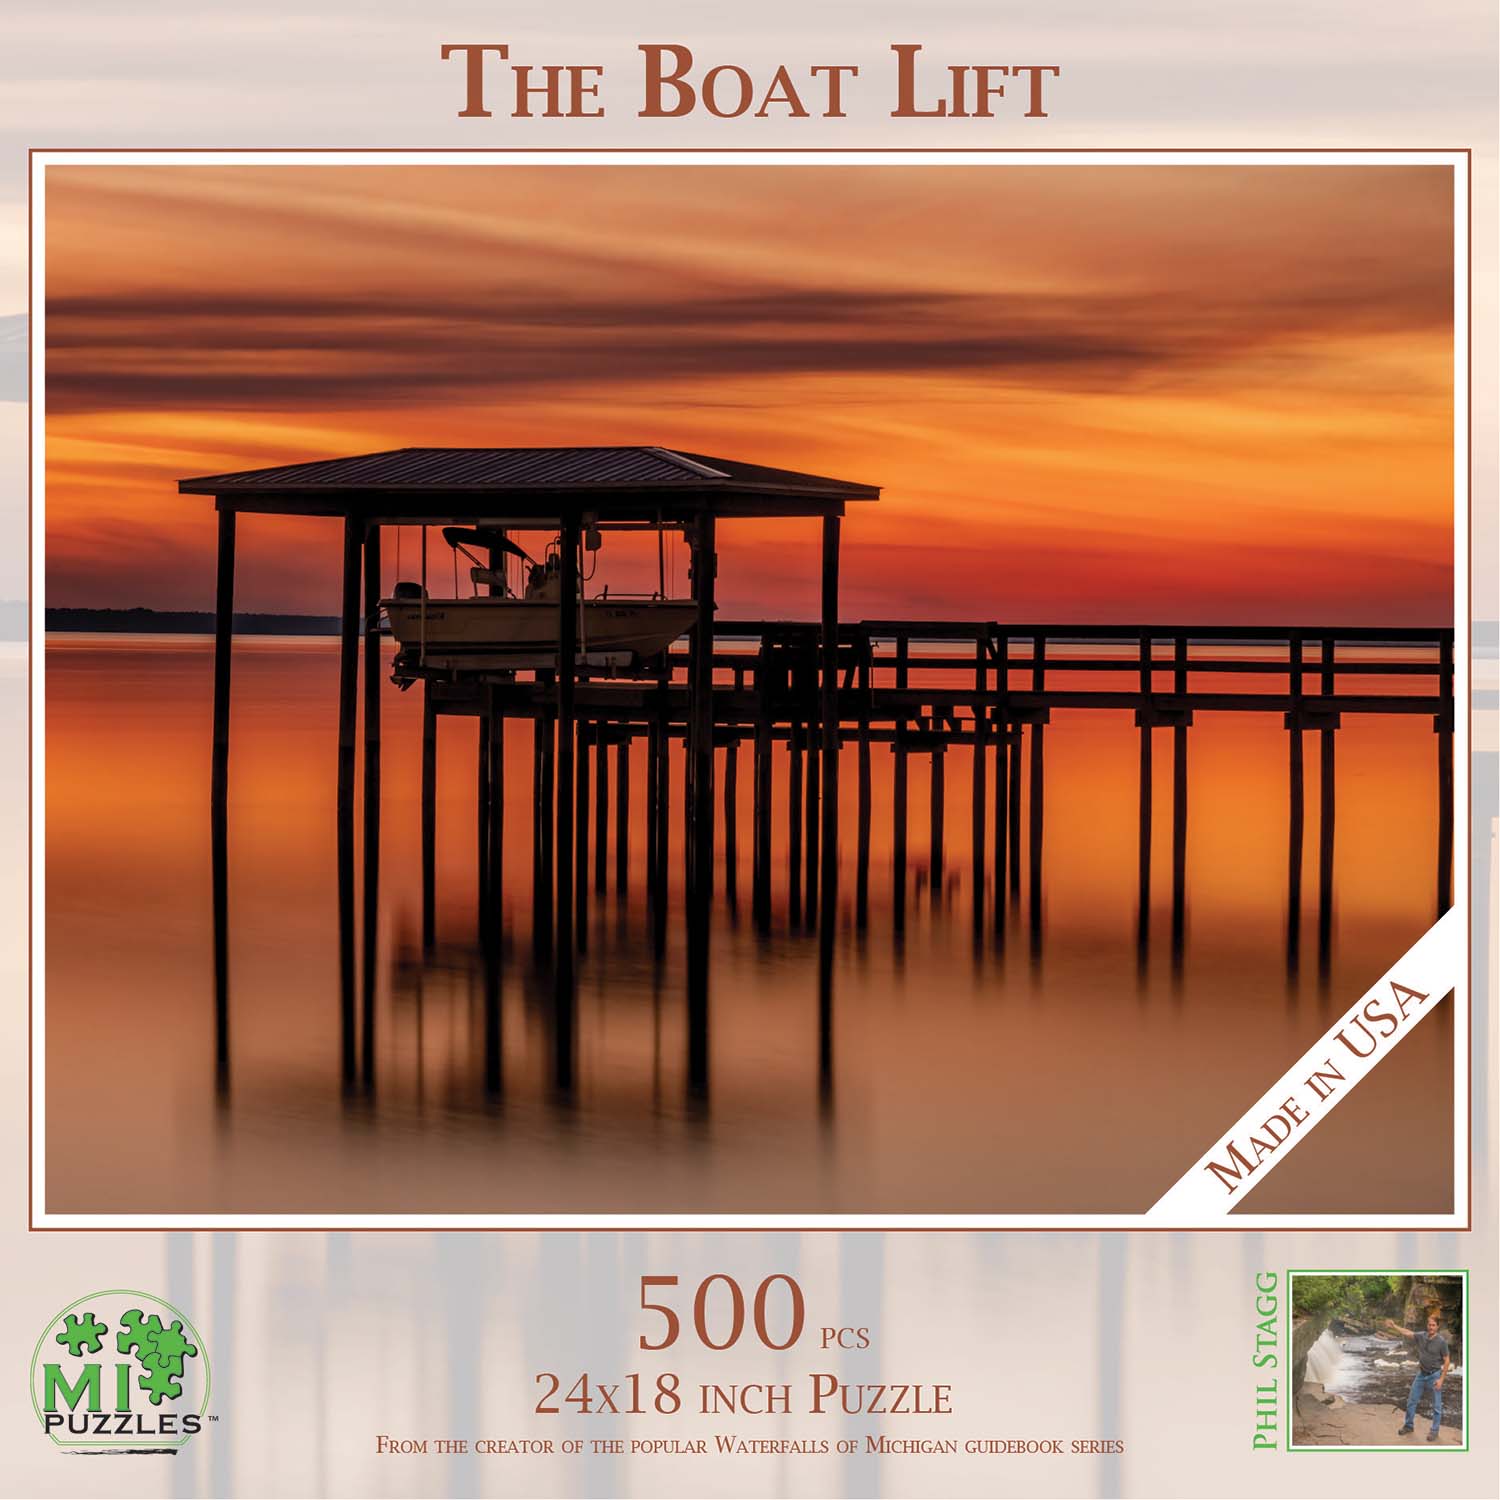 The Boat Lift Boat Jigsaw Puzzle